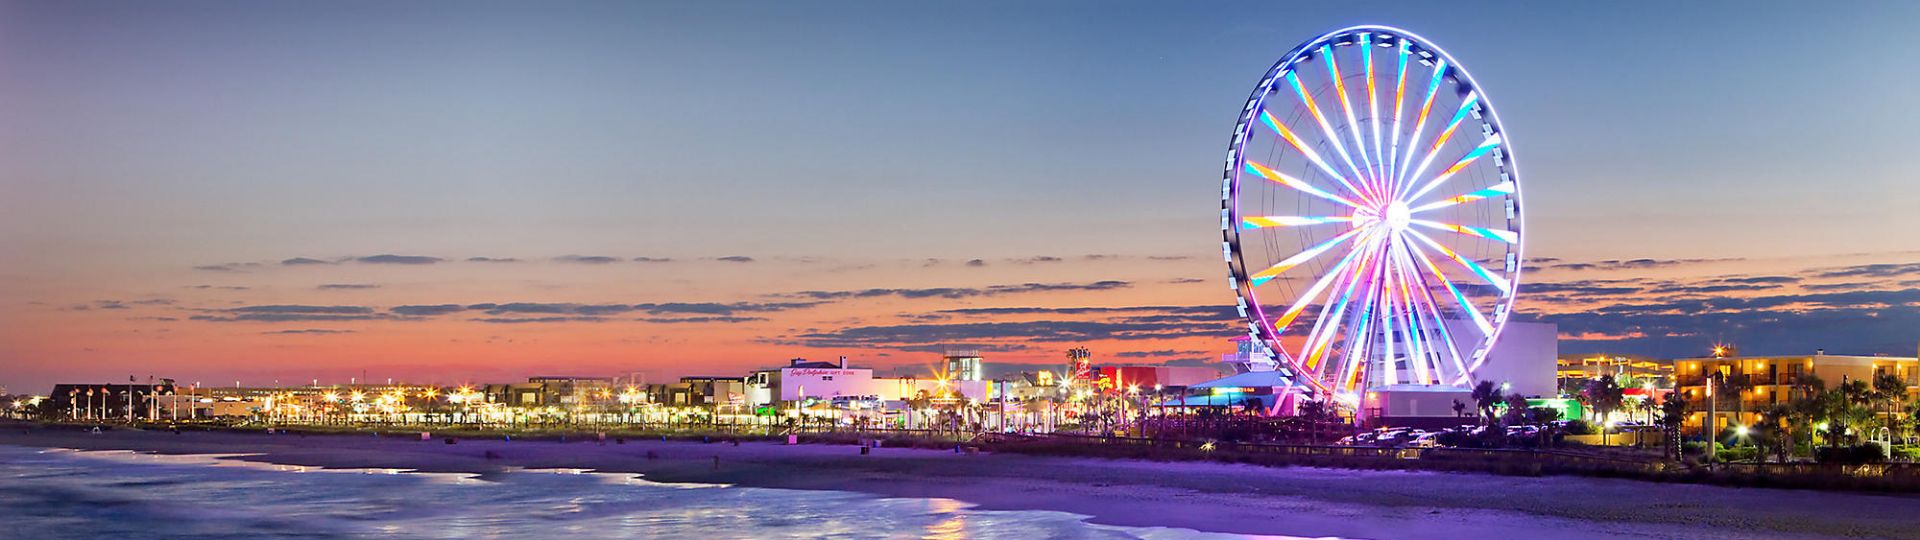 Hotels in Myrtle Beach, United States